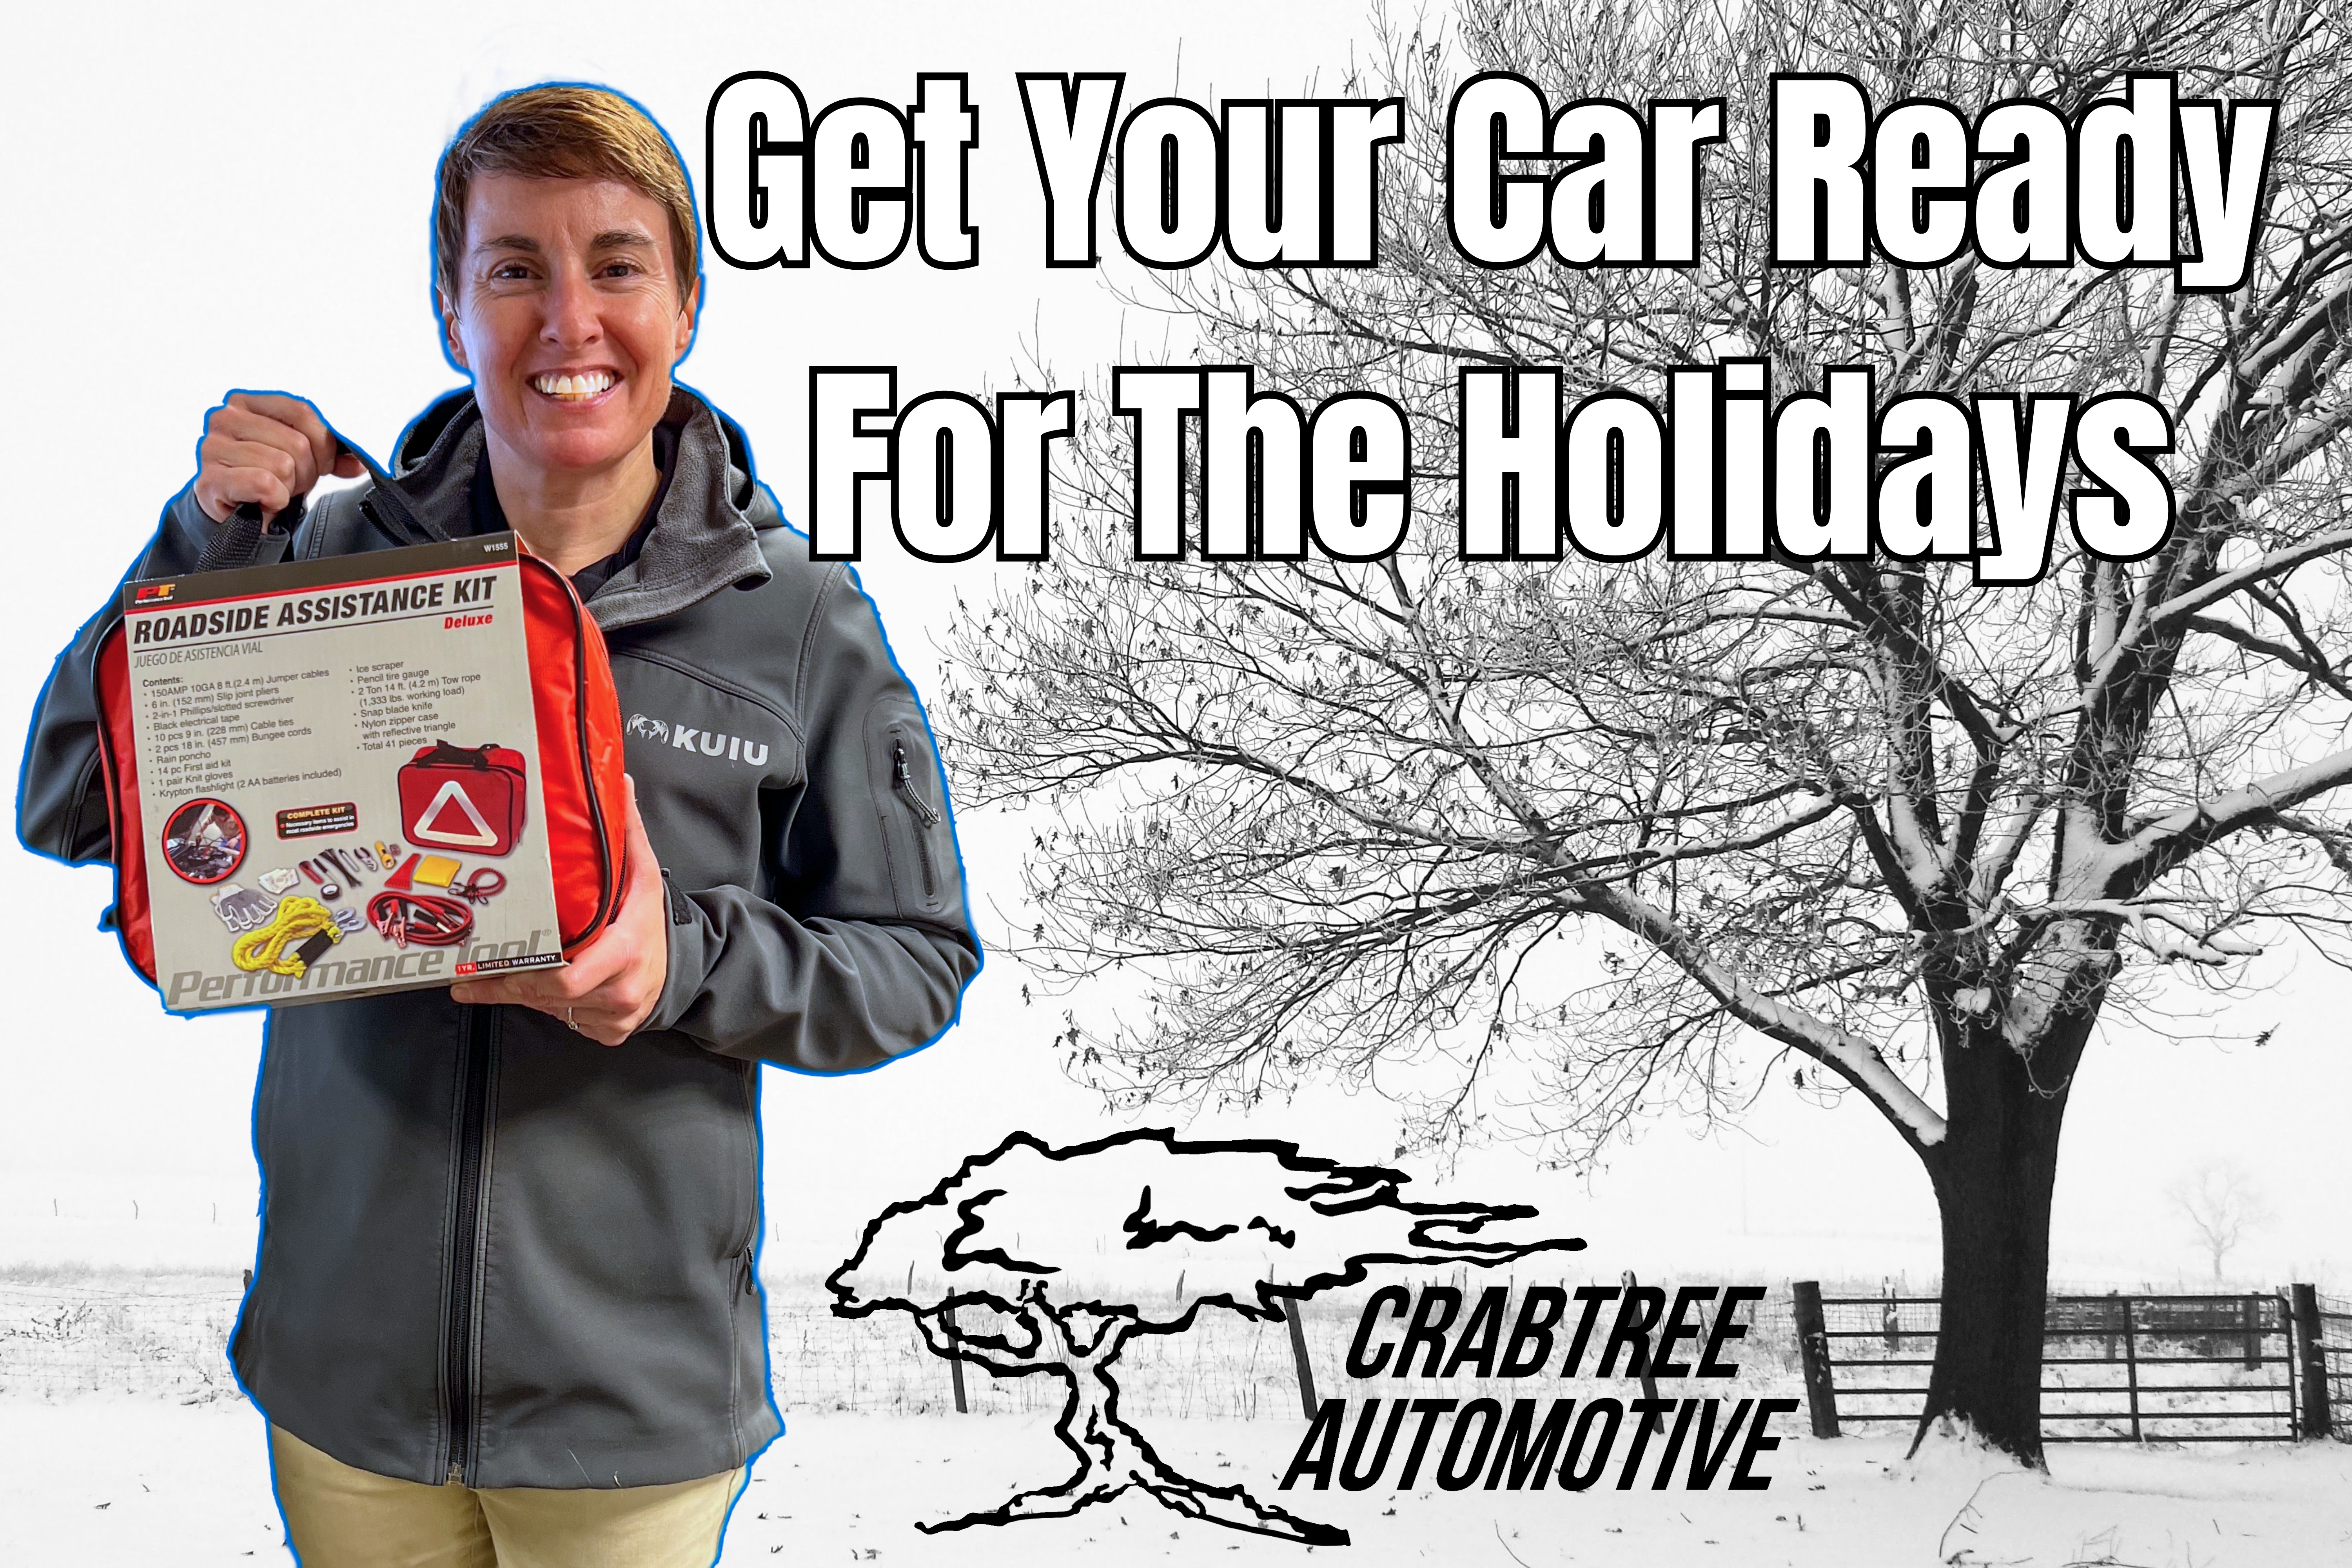 What Does My Car Need For The Holidays?